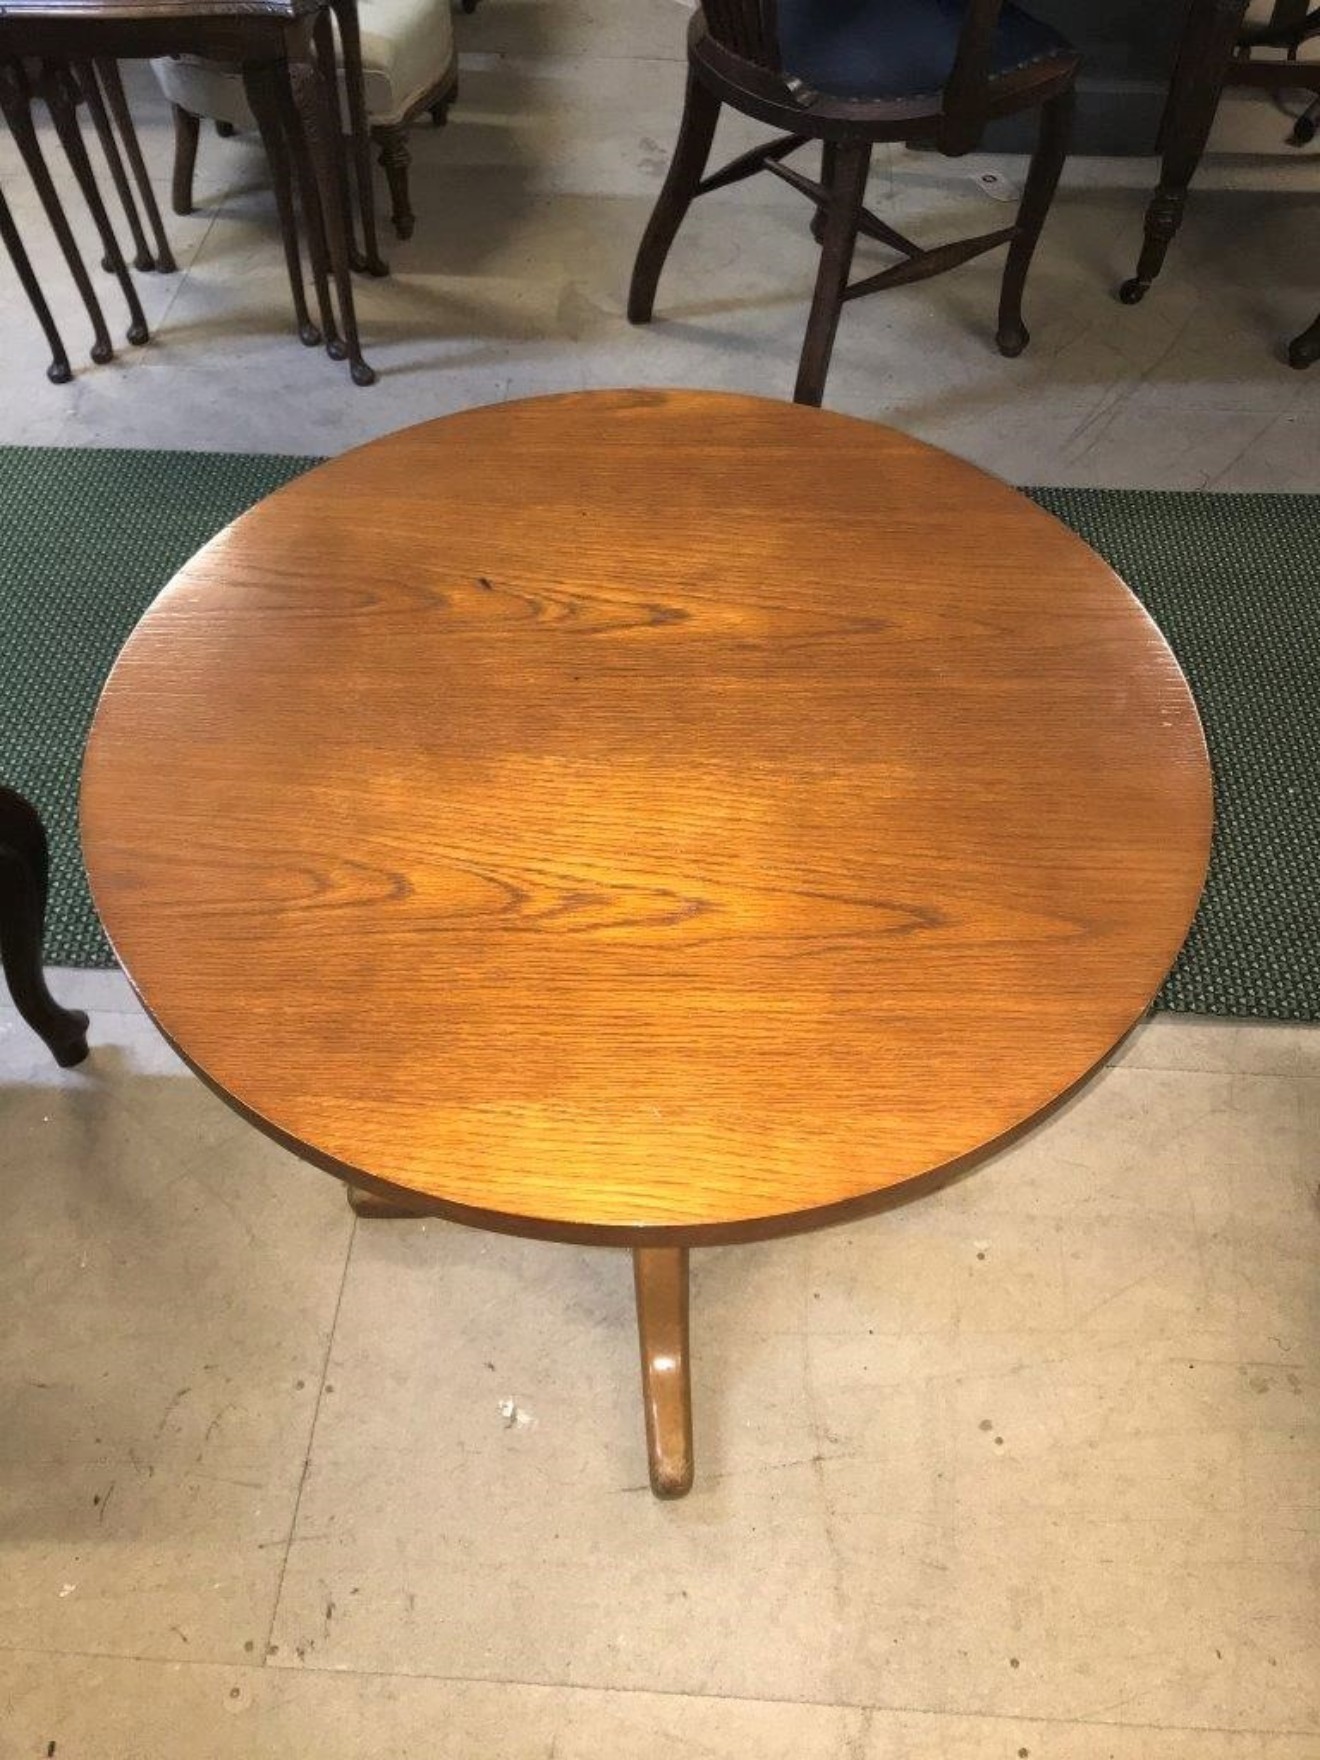 Round Wooden Pub Tables (9)